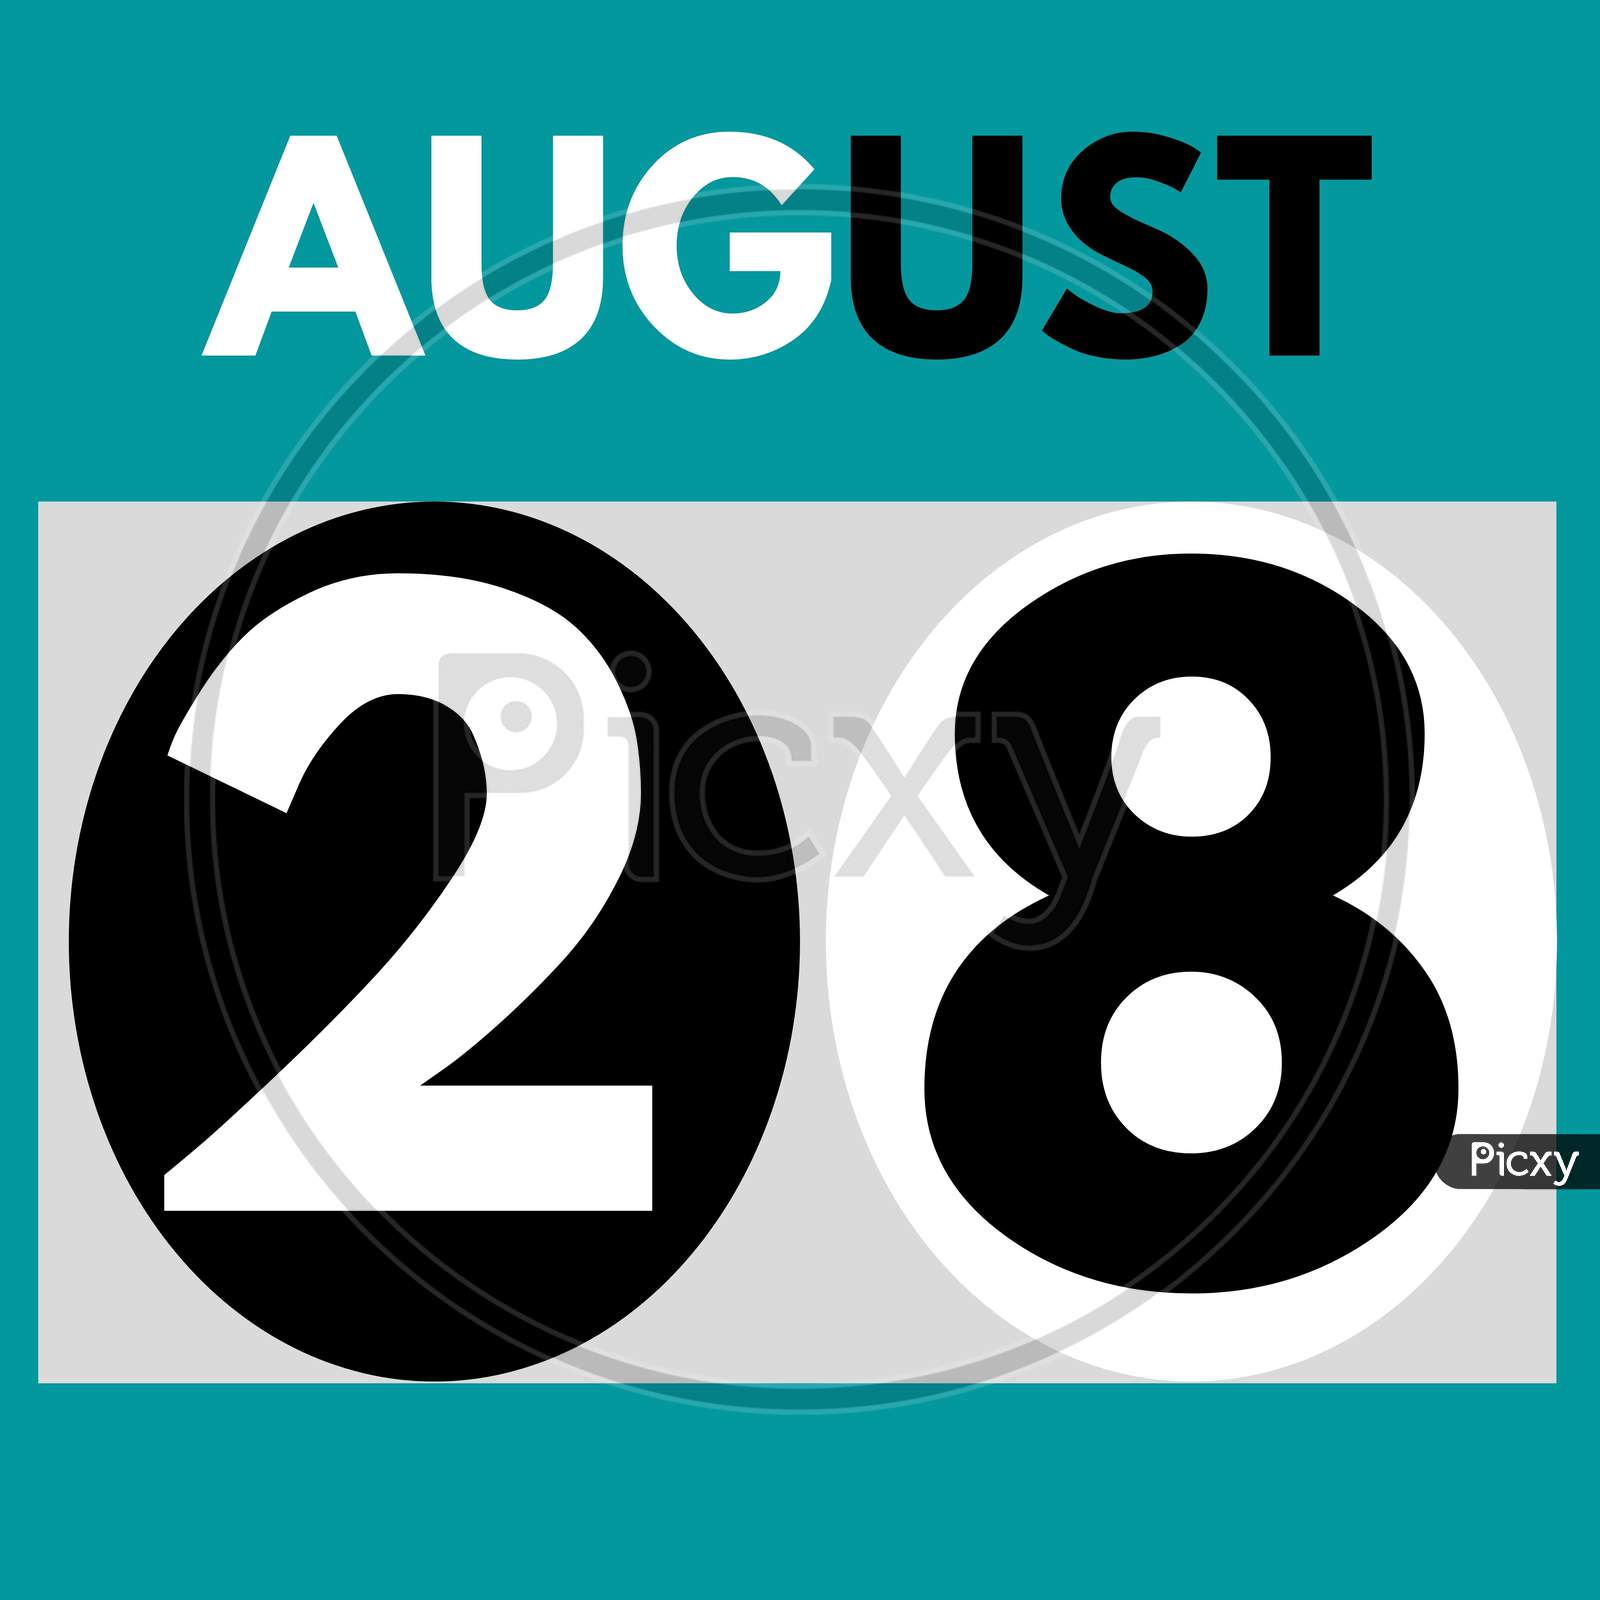 August 28 . Modern Daily Calendar Icon .Date ,Day, Month .Calendar For The Month Of August